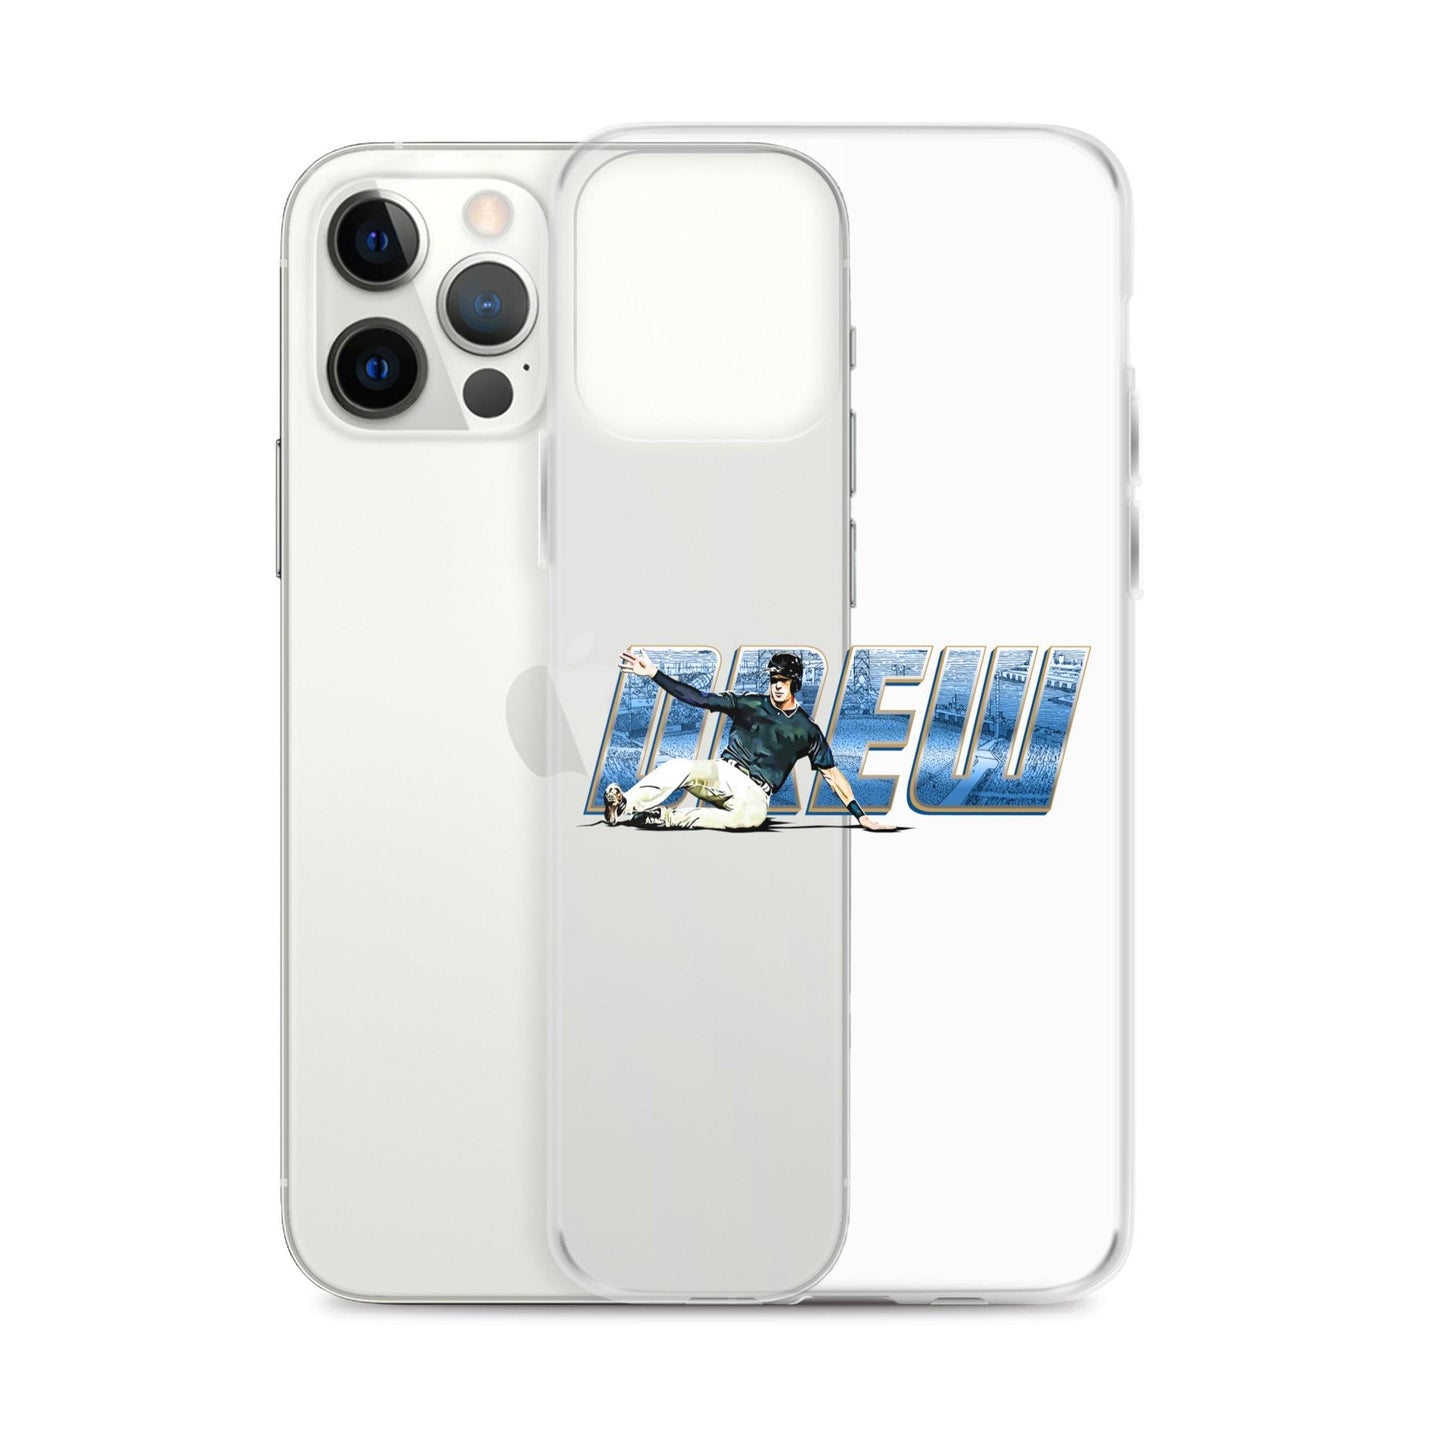 Drew Waters “Signature” iPhone Case - Fan Arch